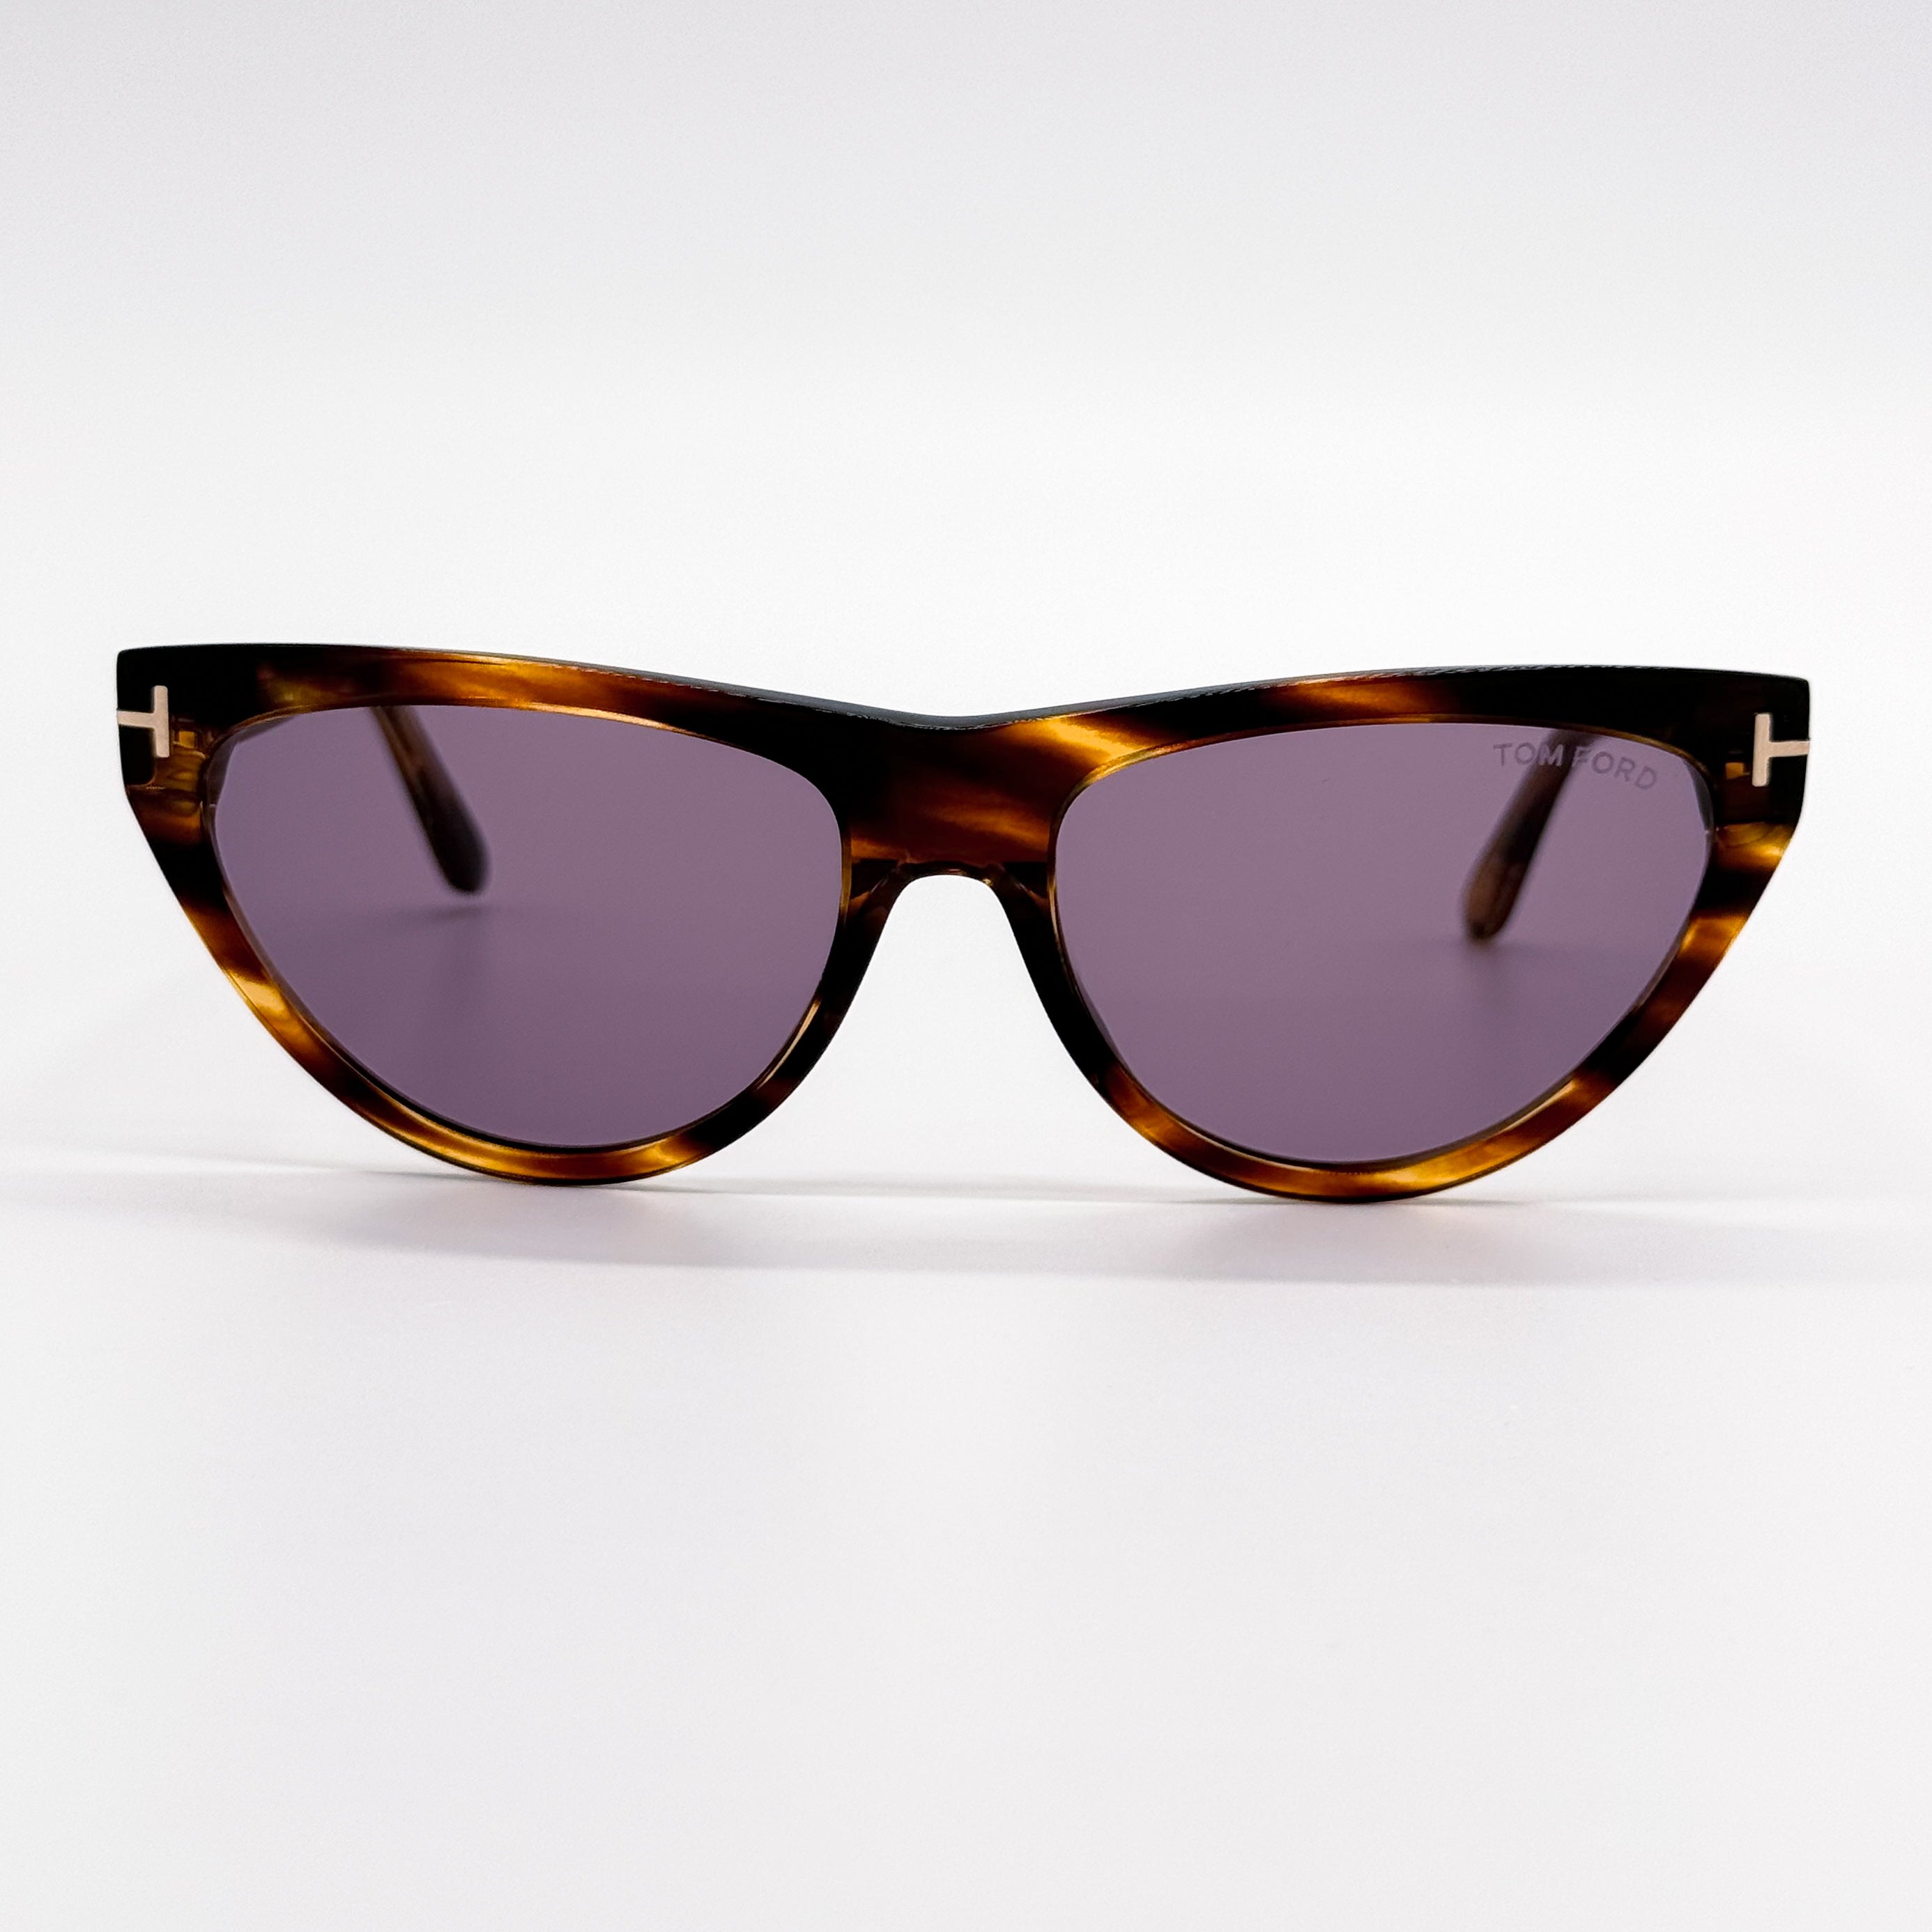 TOM FORD AMBER-02 TF990 55Y SUNGLASSES FT0990/S